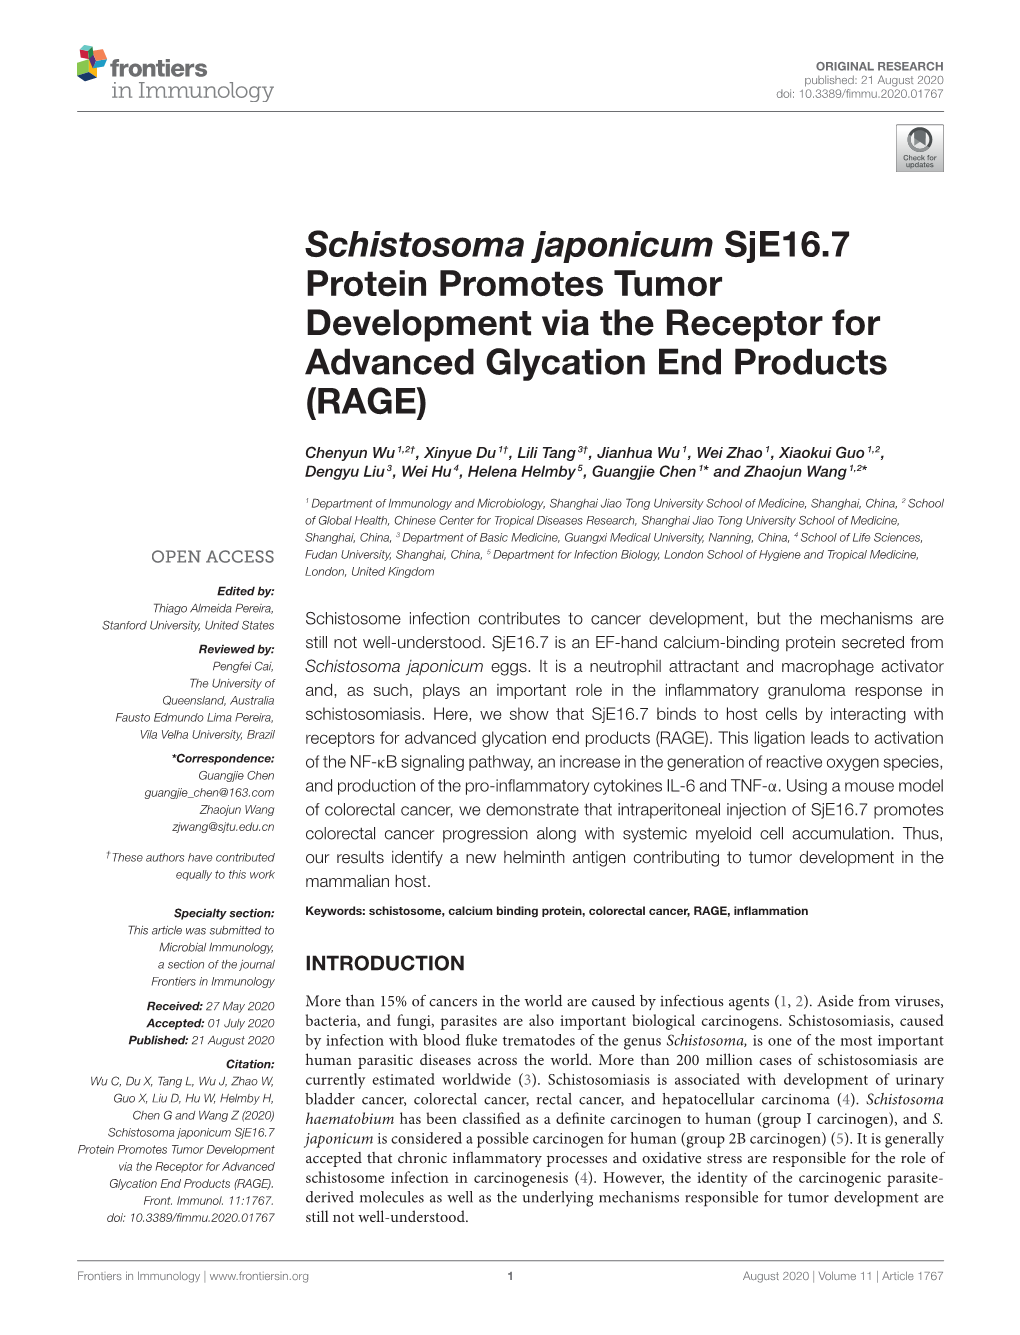 Schistosoma Japonicum Sje16.7 Protein Promotes Tumor Development Via the Receptor for Advanced Glycation End Products (RAGE)